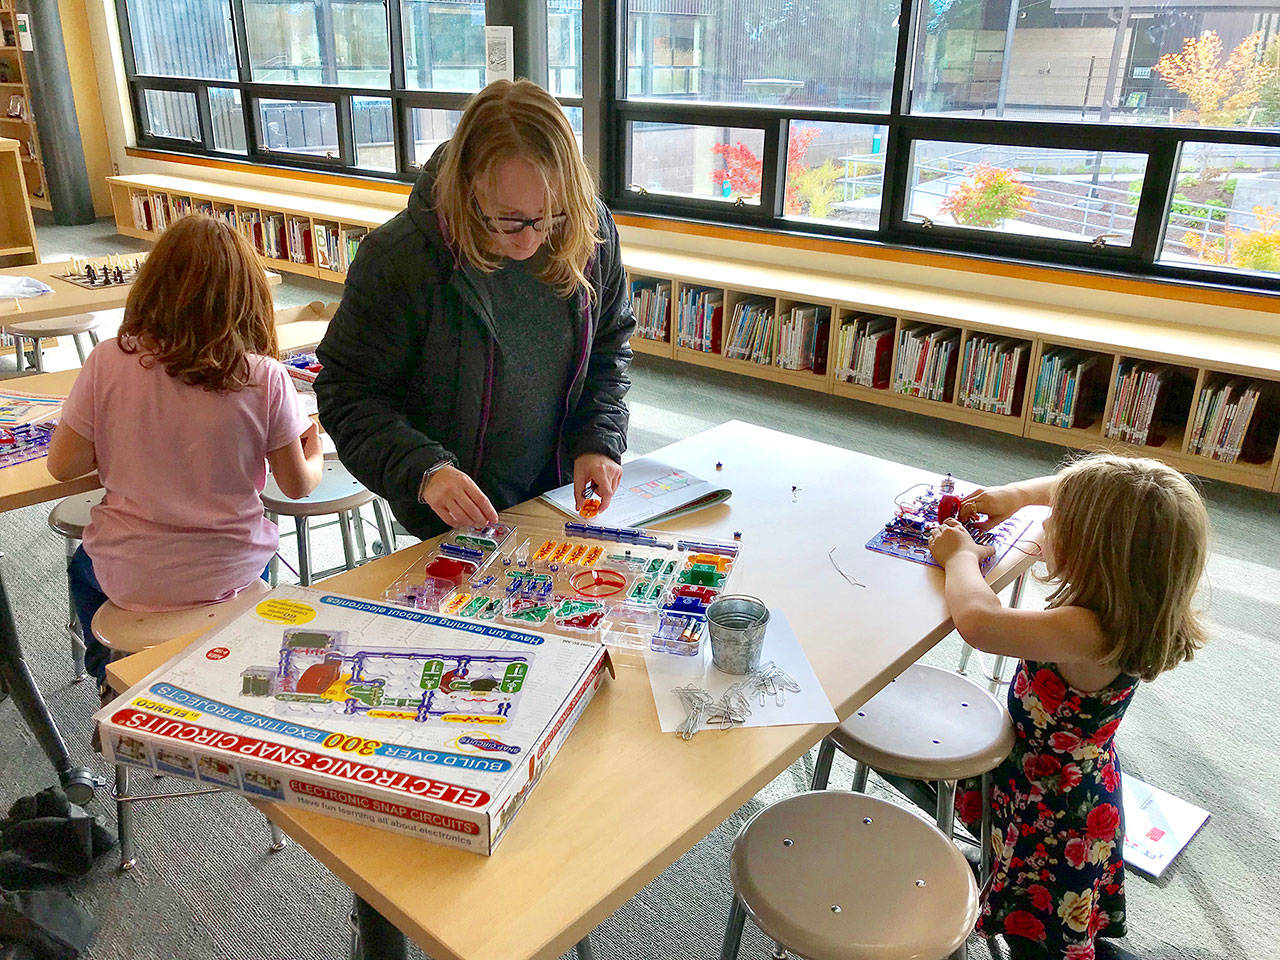 Youth Services Library Manager Hilary Verheggen leads two Salish Coast Elementary School students in a lesson on how to create snap circuits. The snap circuits have been so popular at the Salish After Hours program that organizers had to buy more sets, Port Townsend library director Melody Eisler said. (Port Townsend Public Library)